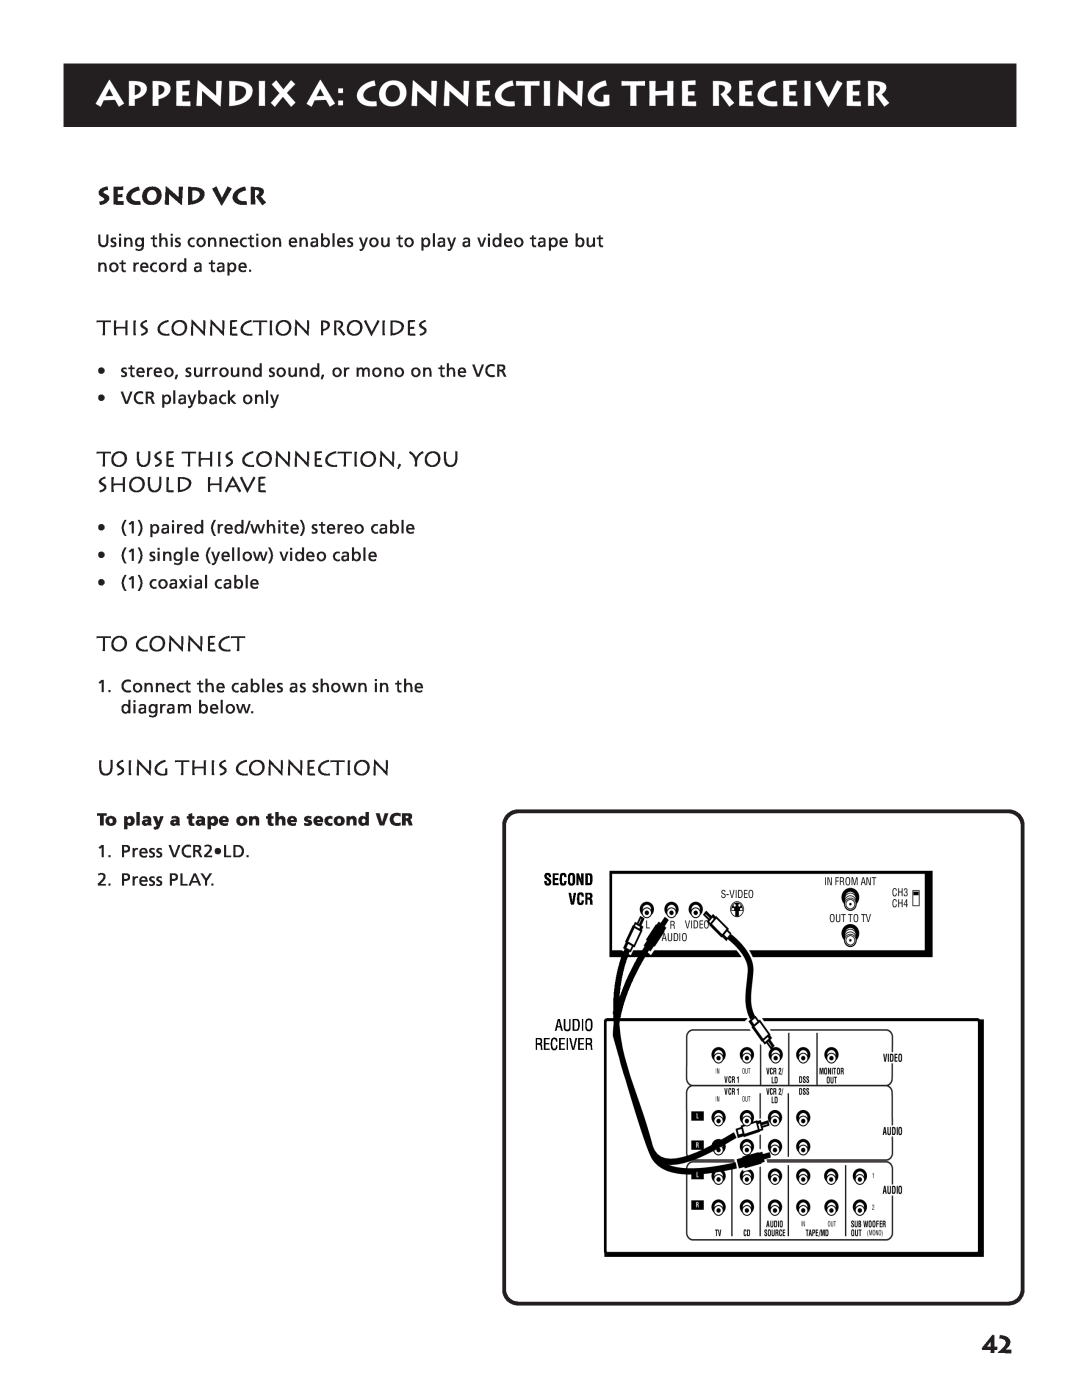 RCA RV3693 manual Second Vcr, Appendix A Connecting The Receiver, To play a tape on the second VCR 